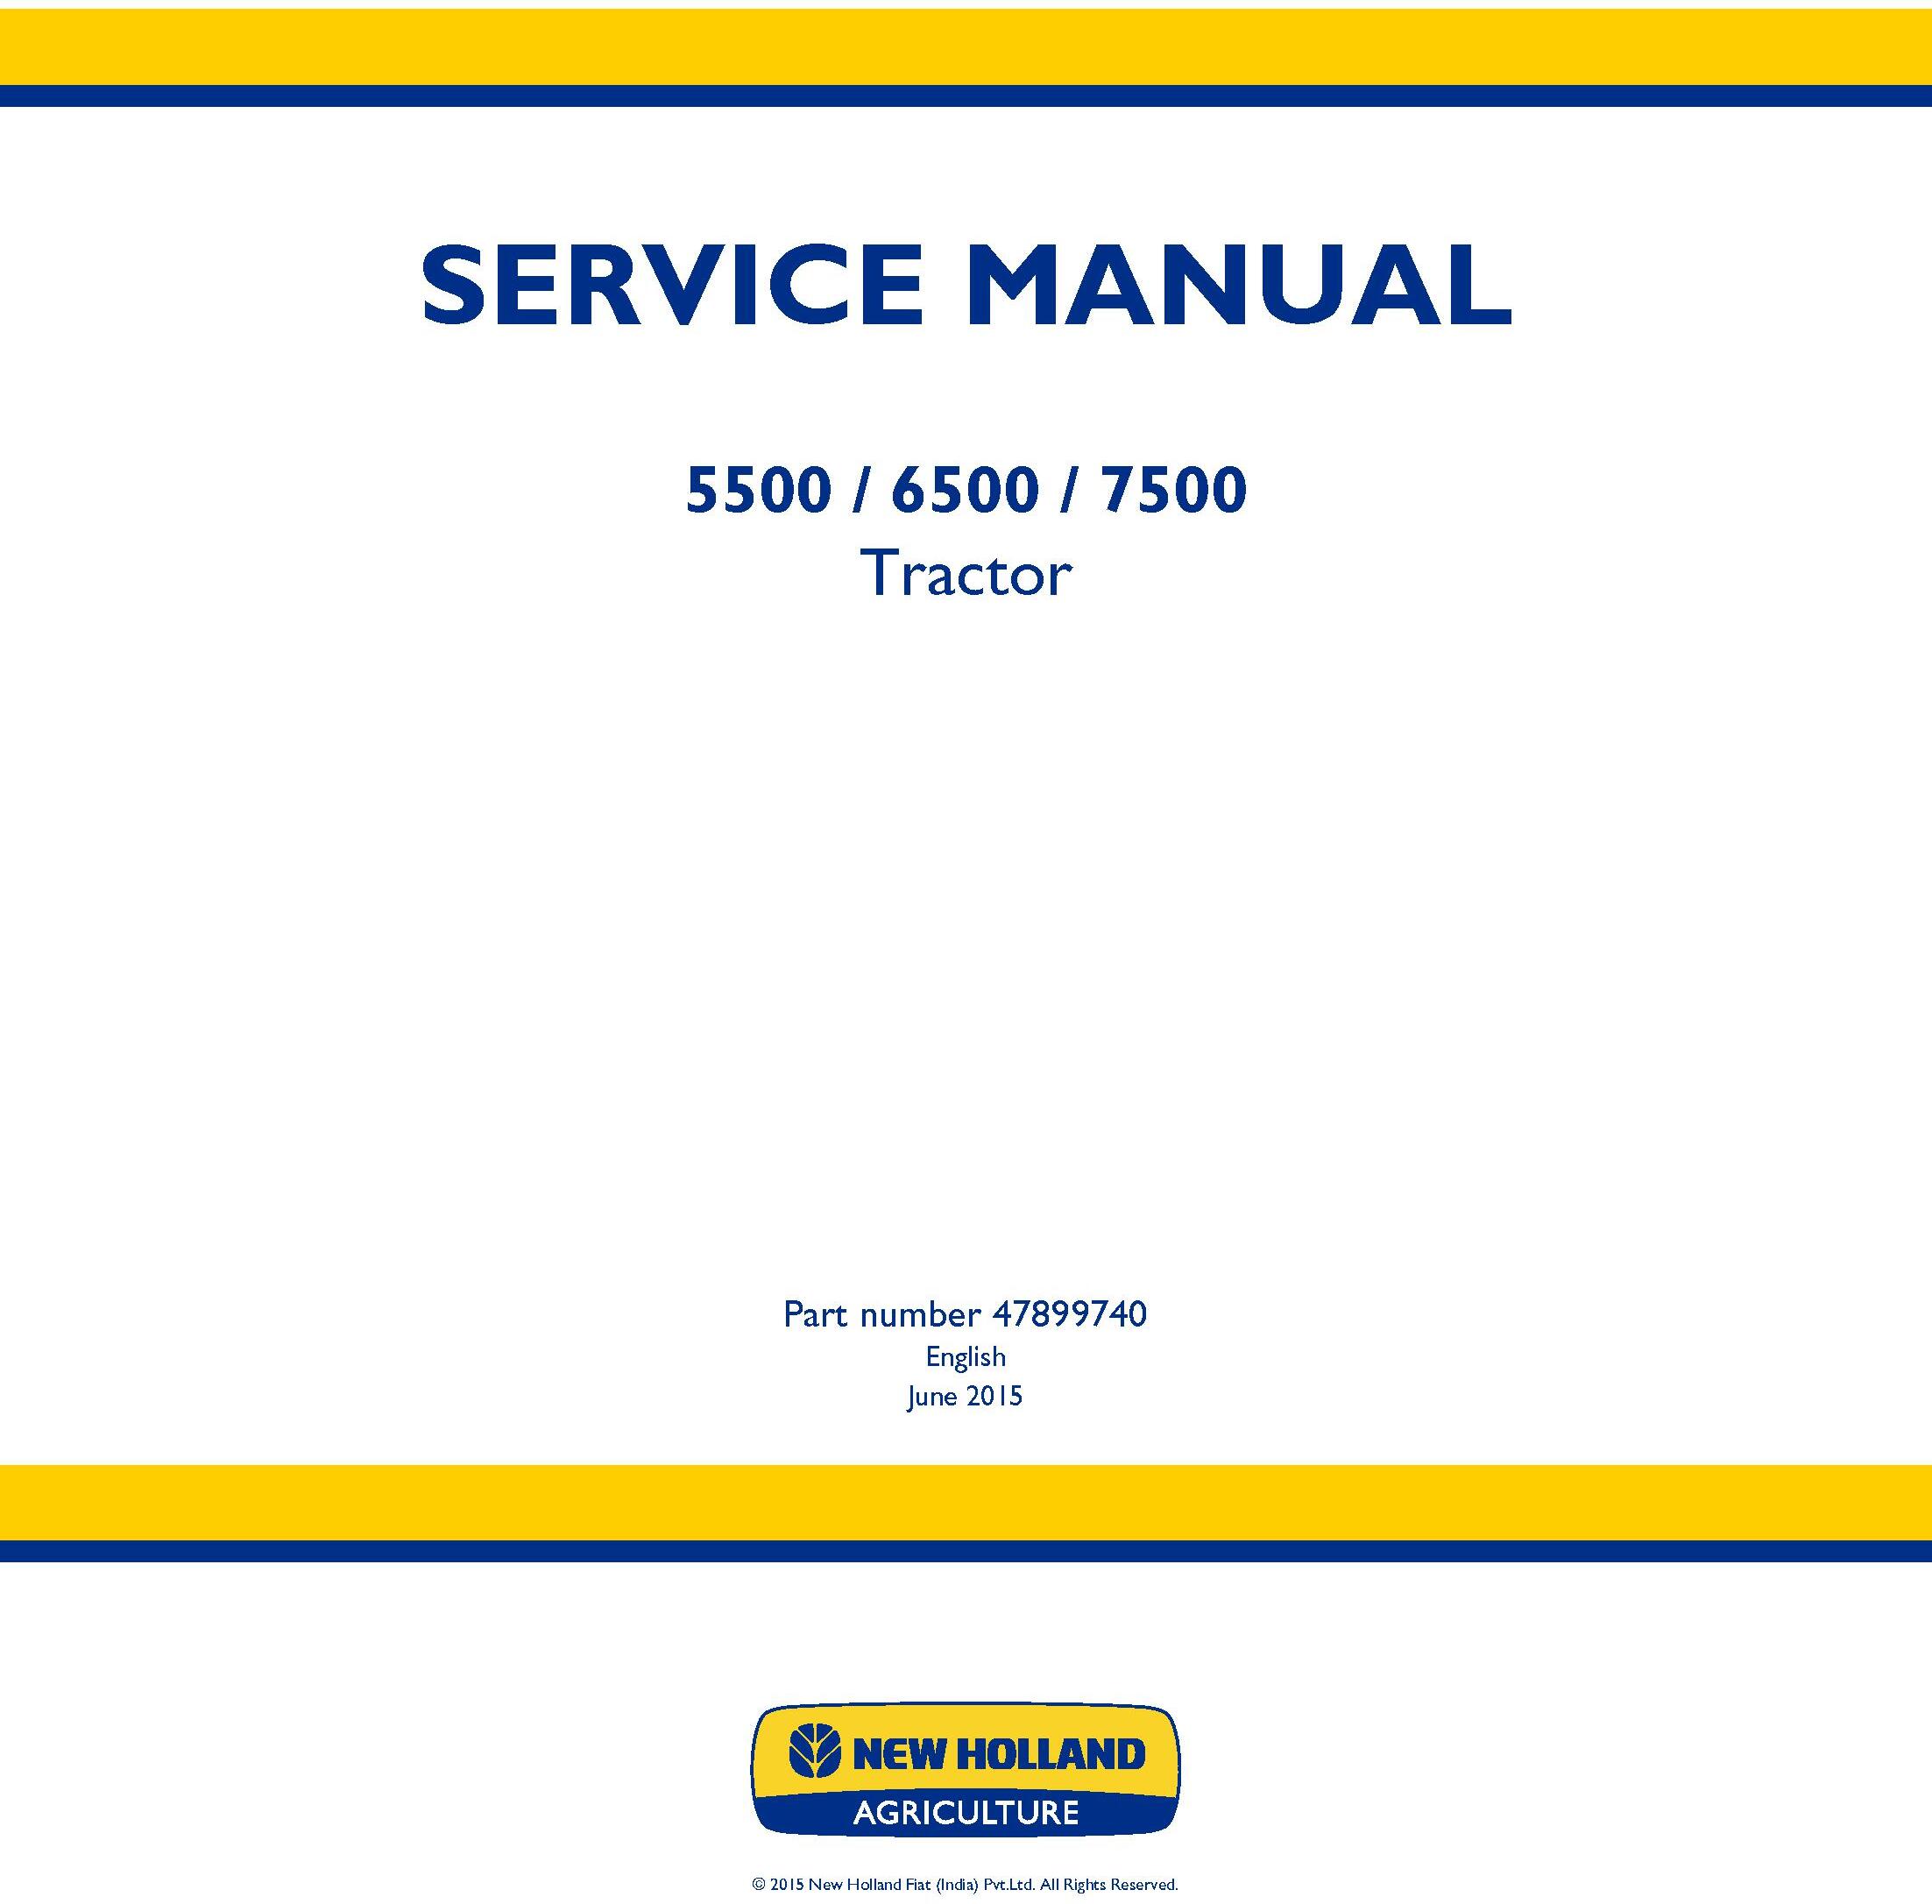 New Holland 5500, 6500, 7500 Tier 3 Tractor Service Manual - 19447